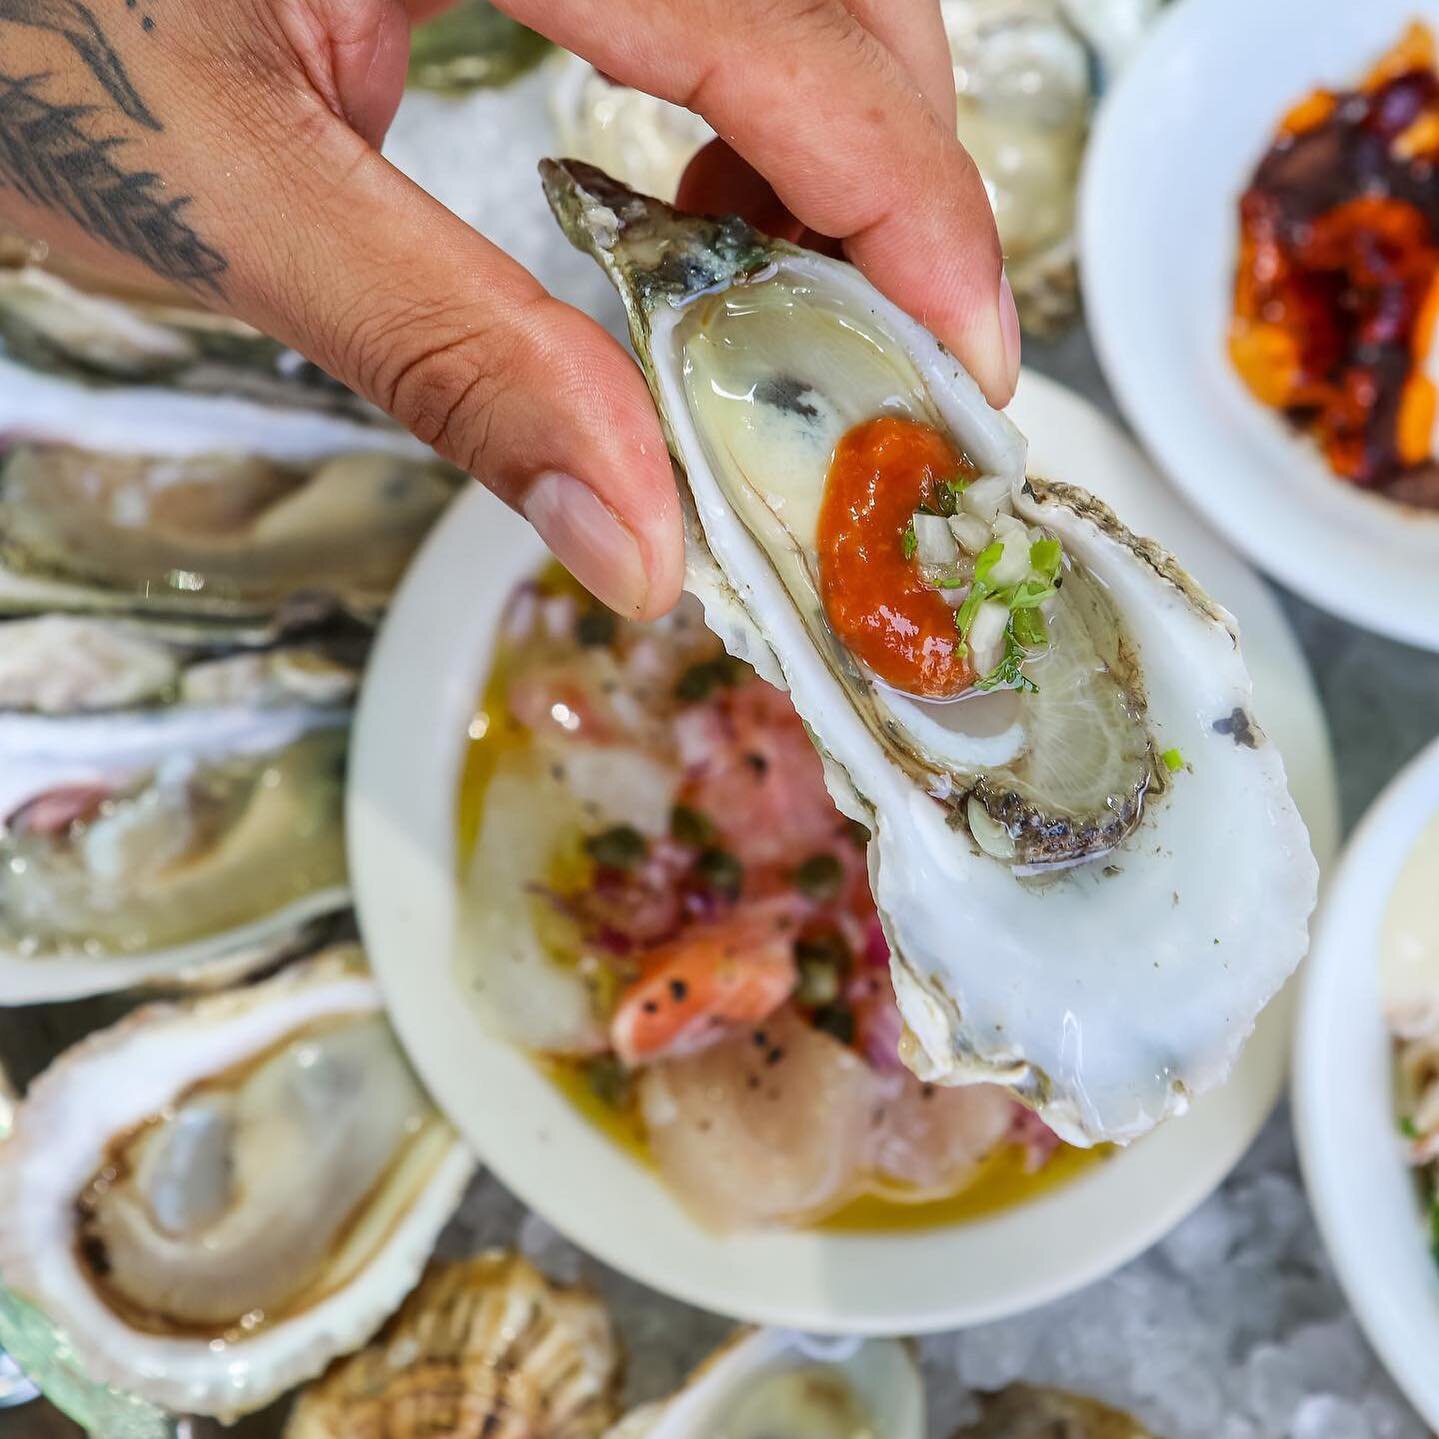 Blades ⚔️🦦🪒
🦪 @barrierislandoysters 
📸 @maryelda 

Blades! Wild, knife edged oysters, grown in clusters, harvested from the shorelines of estuaries in South Carolina&rsquo;s lowcountry. At an oyster roast growing up, @arikolender would have been 